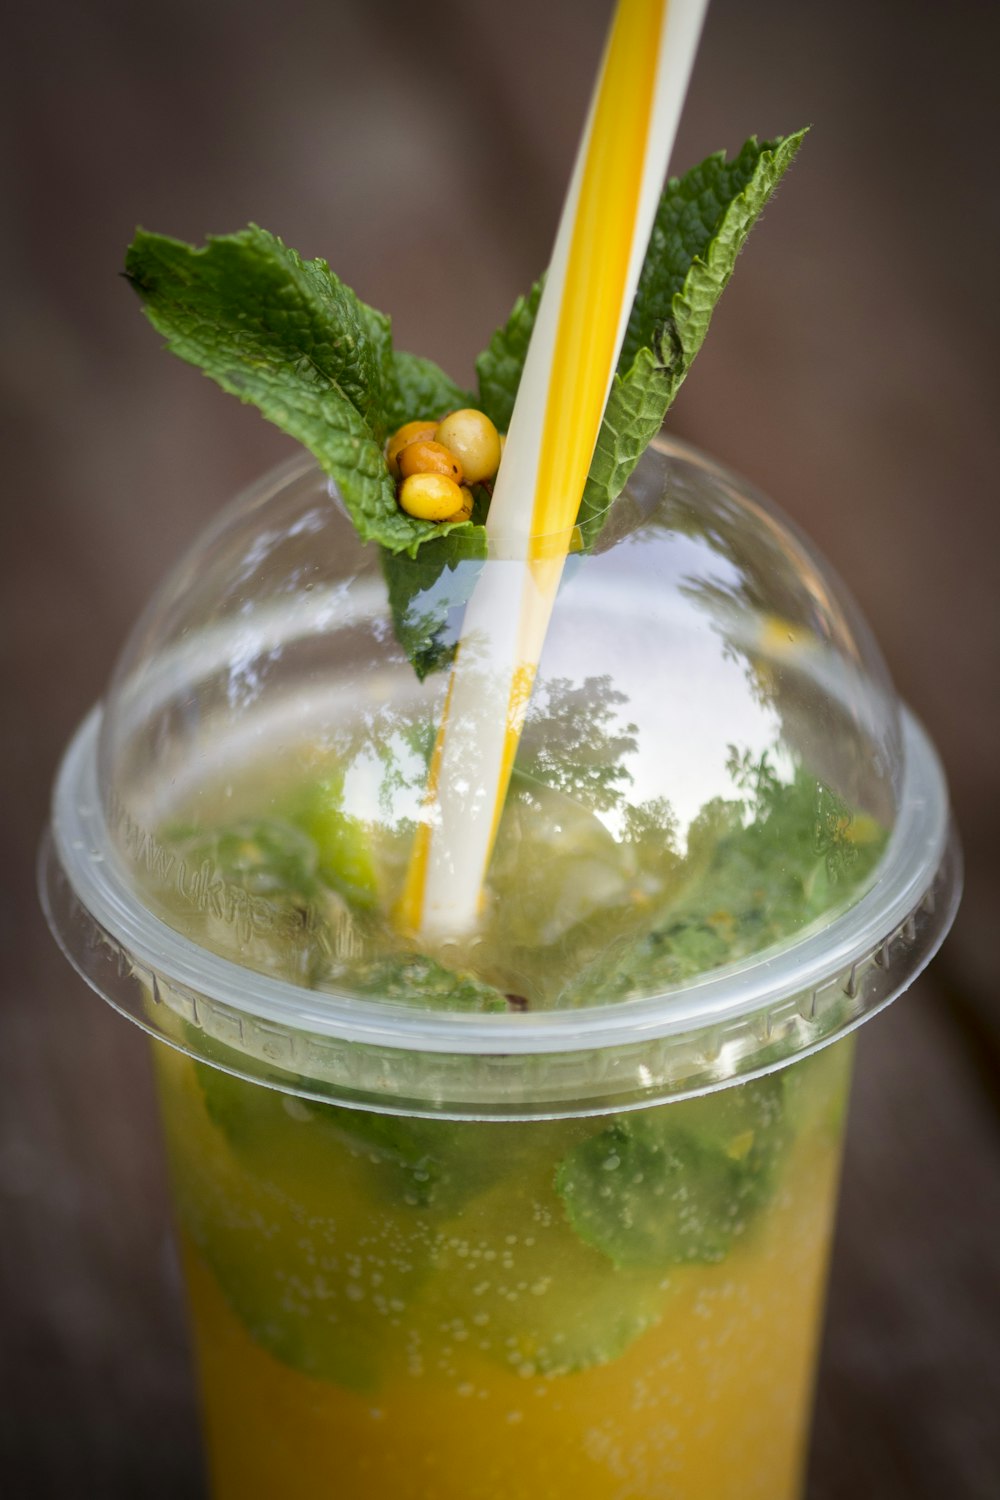 clear plastic cup with yellow liquid and green leaf